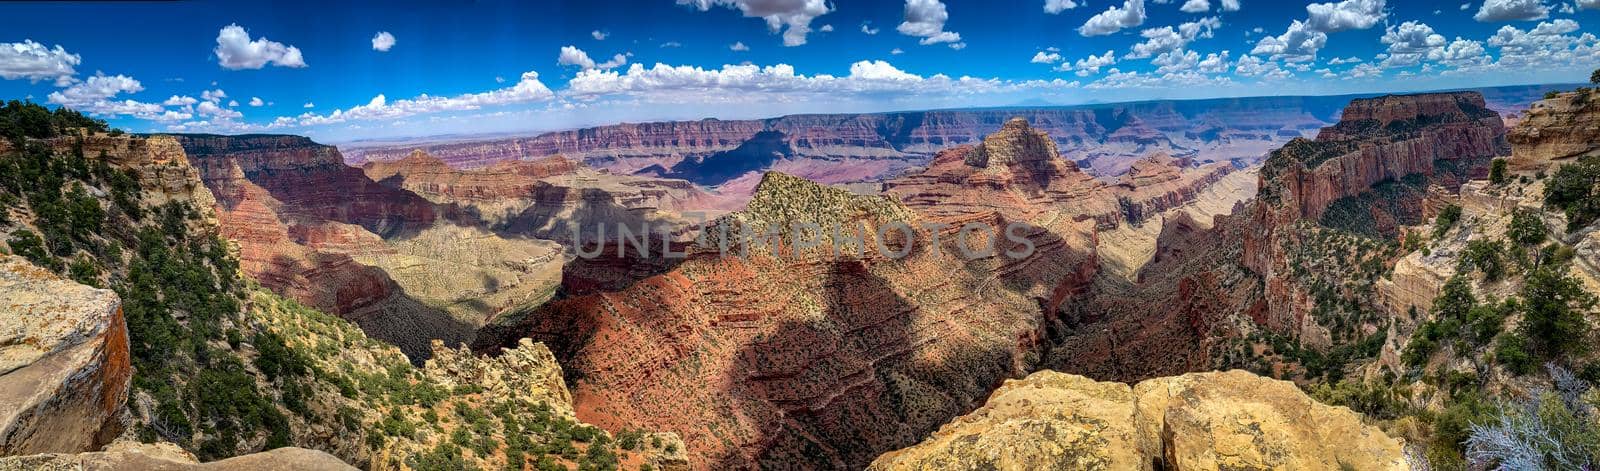 Grand Canyon National Park by gepeng